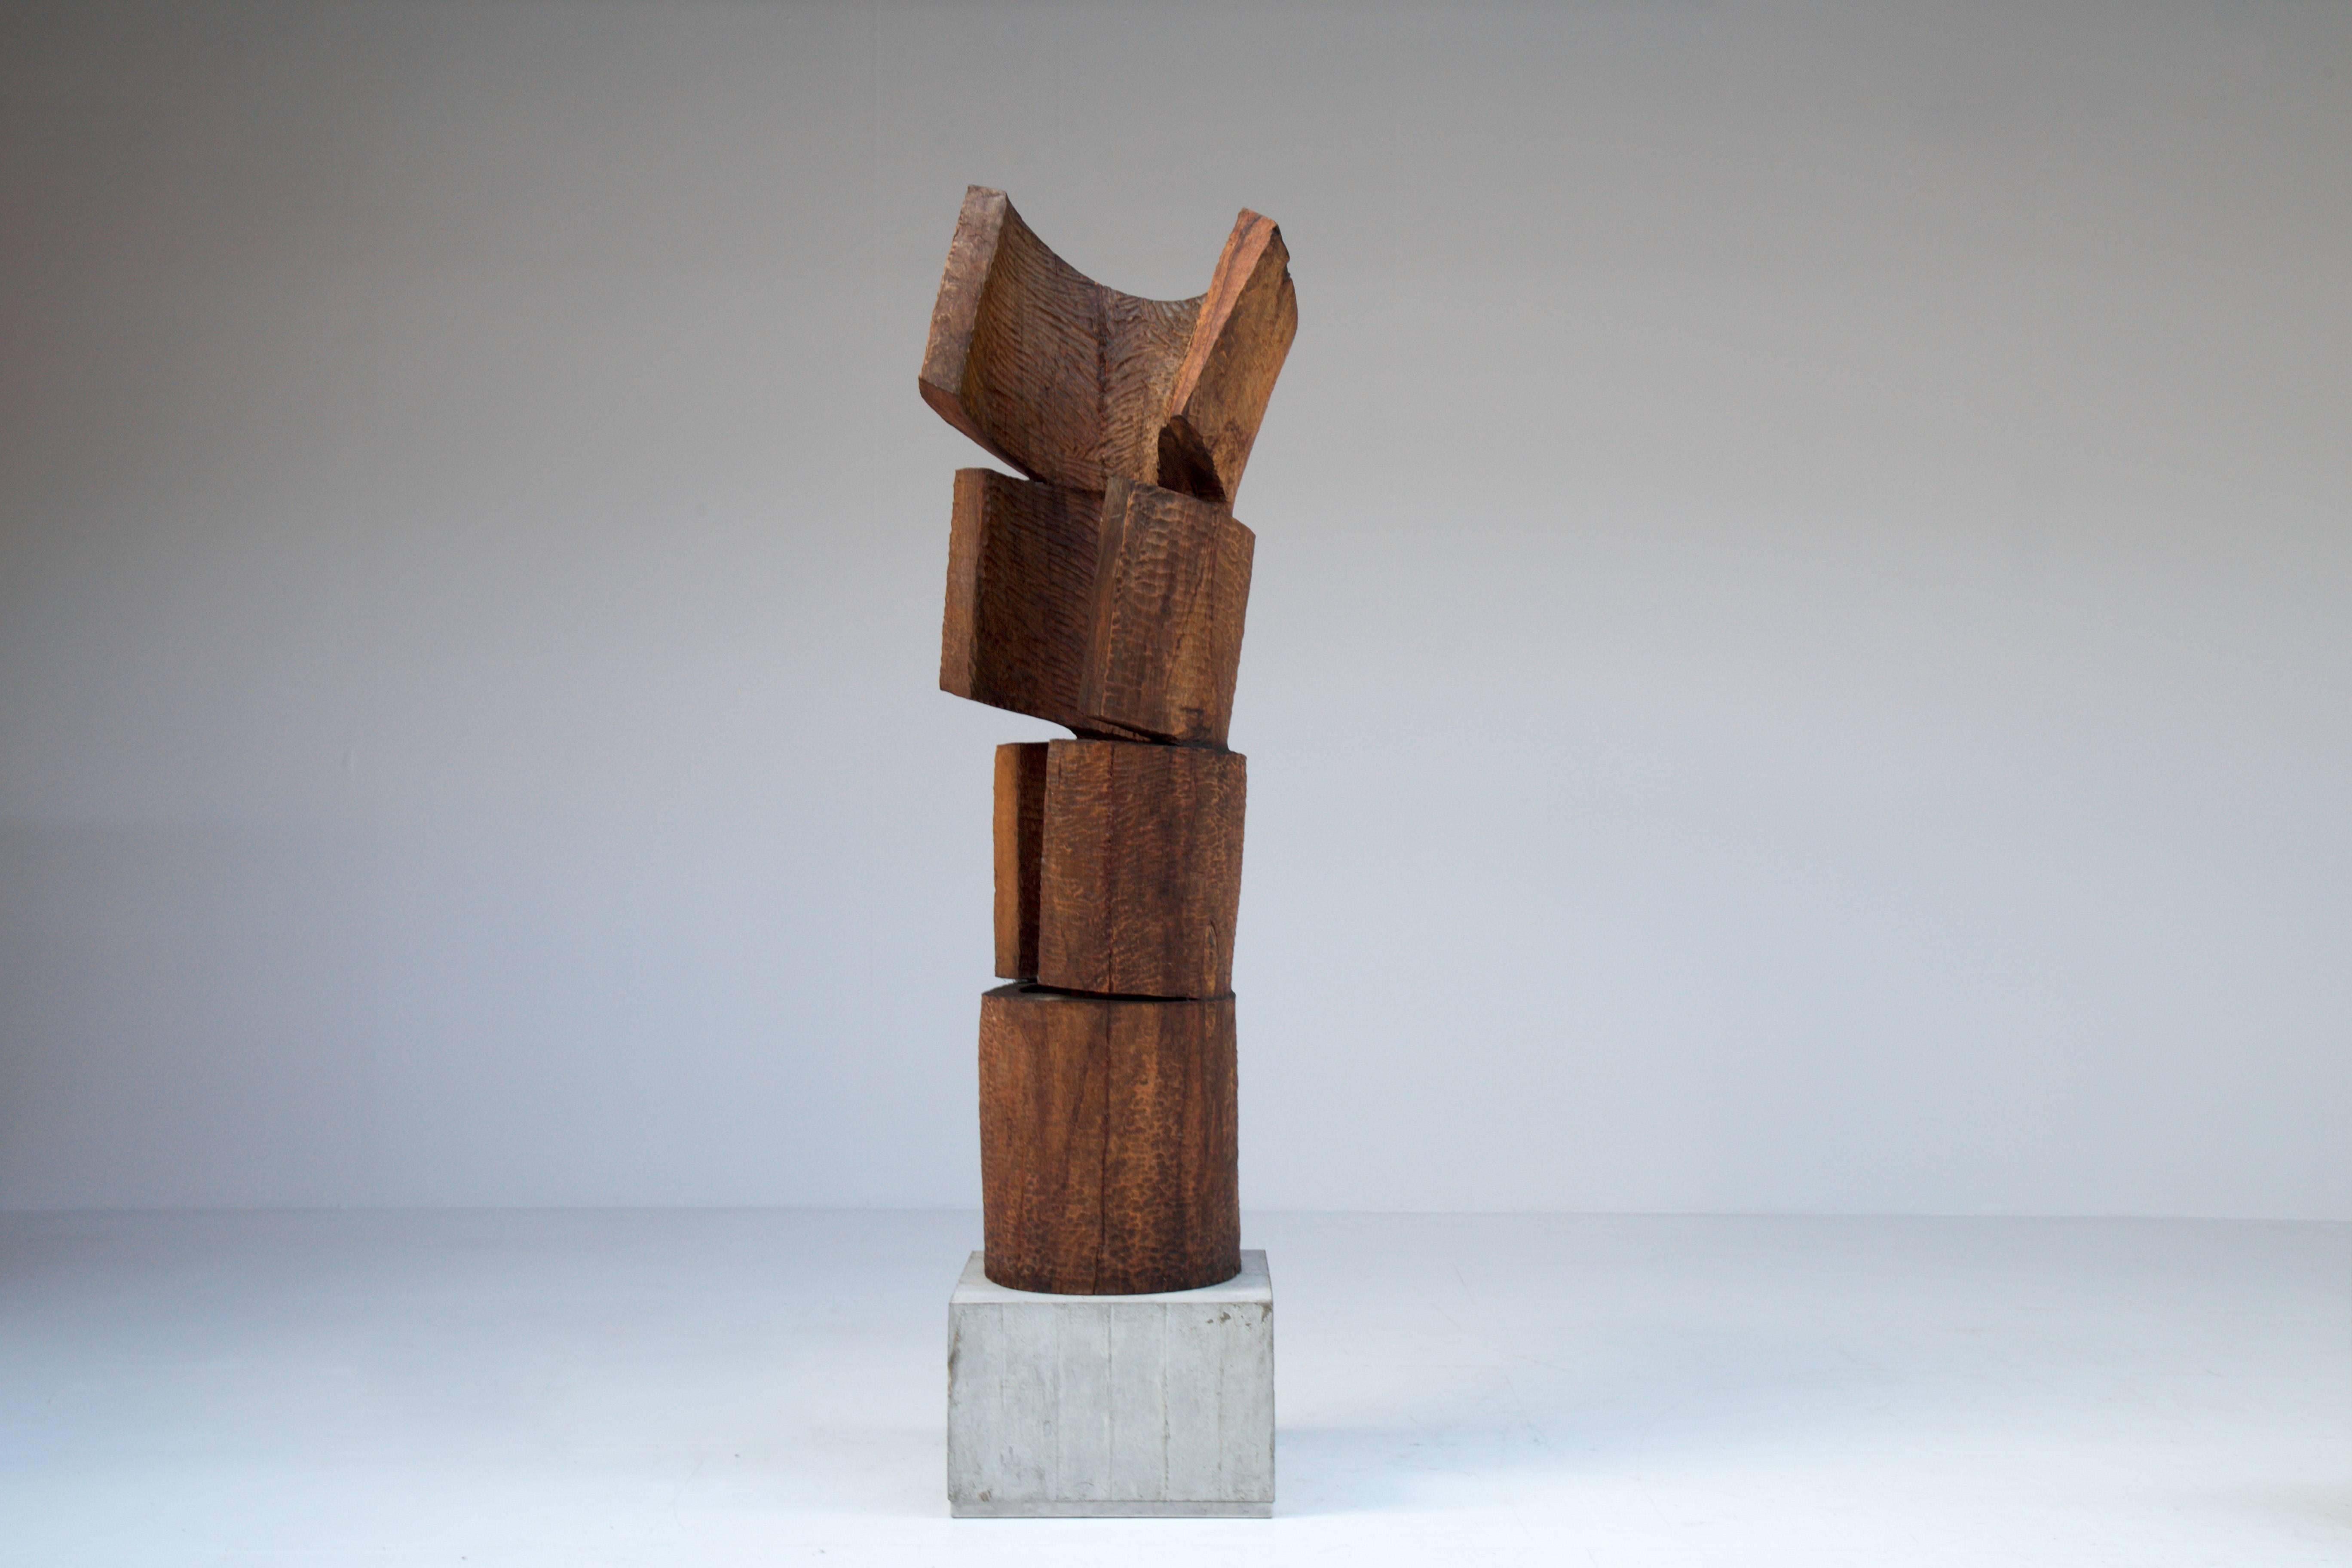 Fantastic sculpture by Belgian artist Xavier Martens, made in the 1980s in Brussels. The sculpture is made out of one single piece of wood.